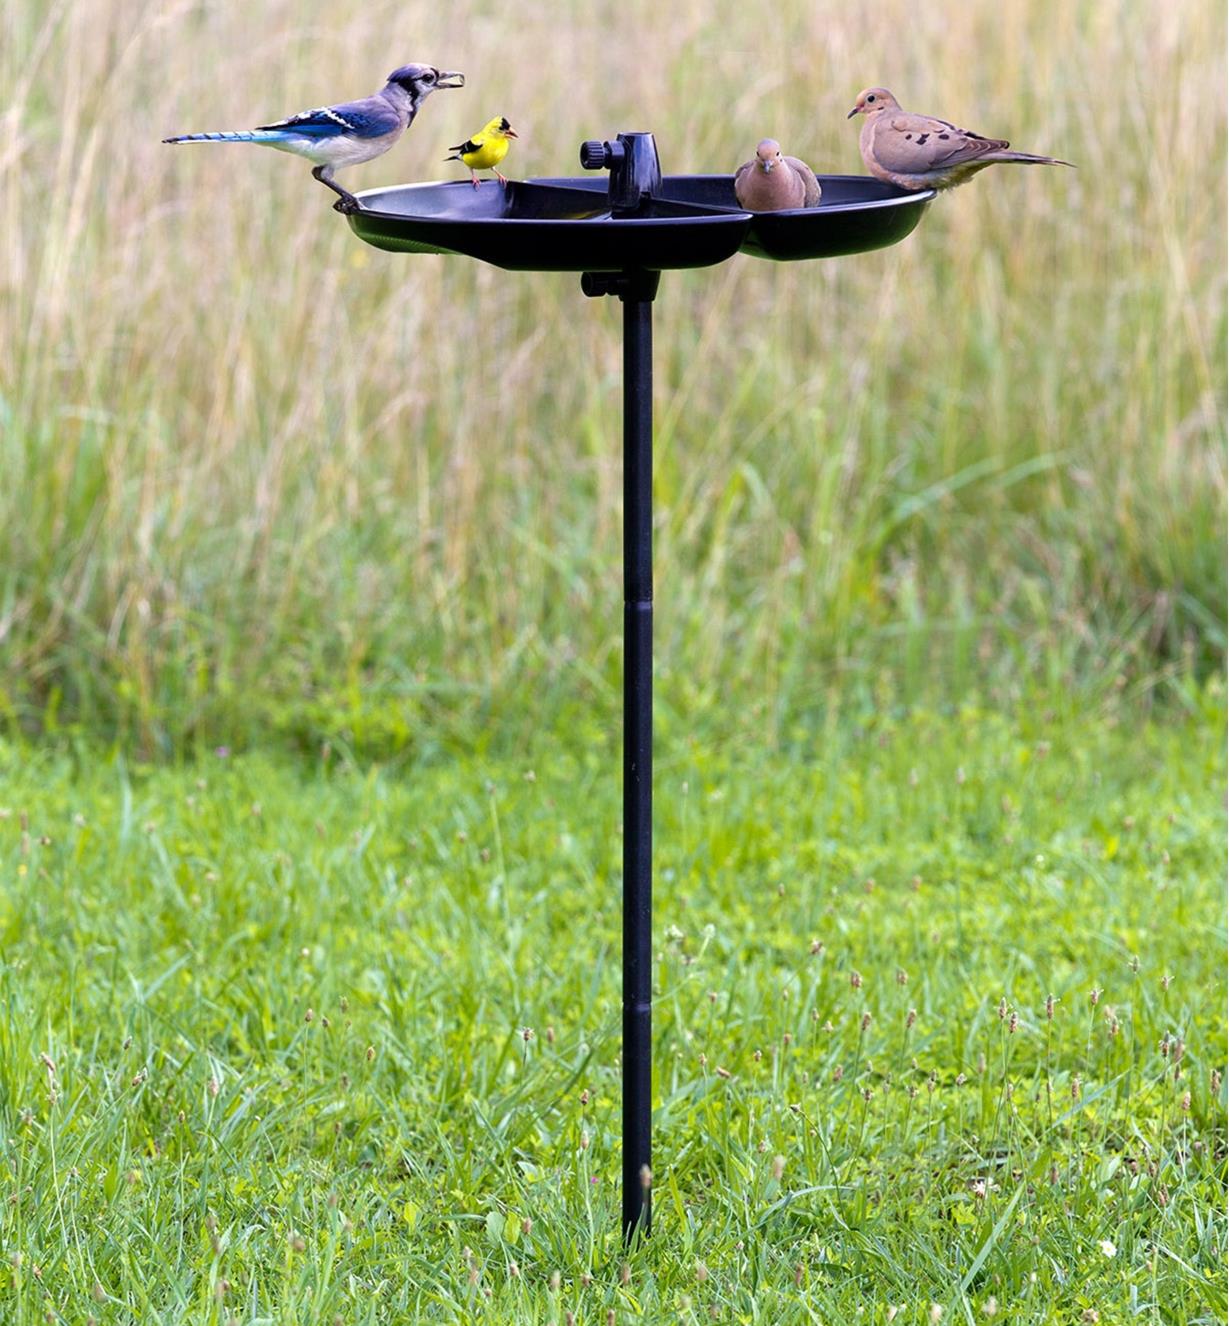 A seed catcher/tray feeder mounted on a pole with four birds perching on it.